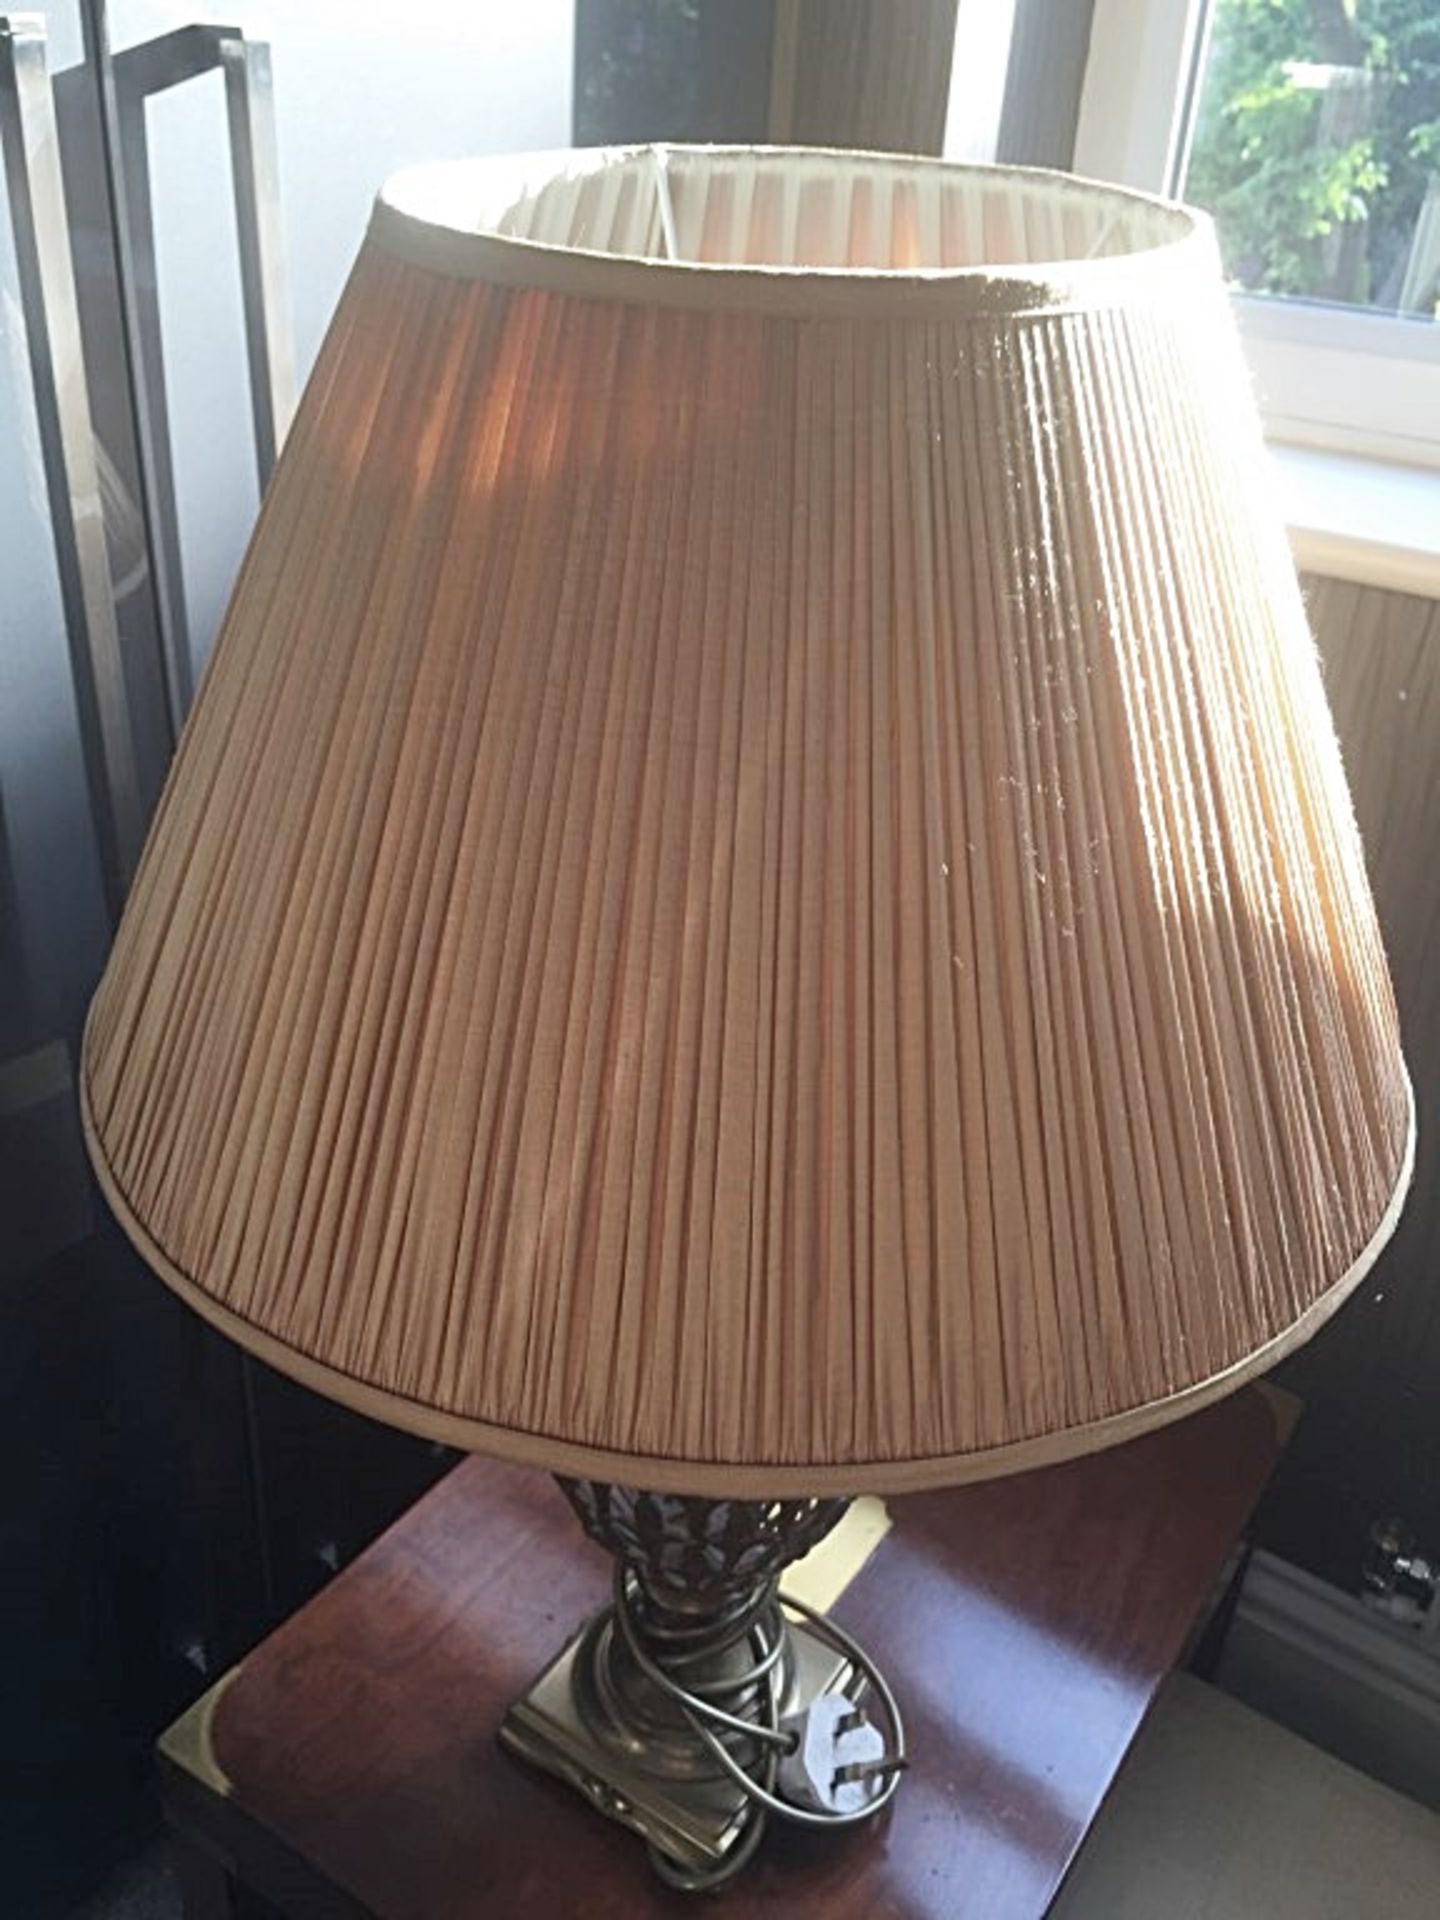 1 x Ornate Metal Table Lamp With Shade - Dimensions: 67cm x Base 13 x 13cm - Pre-owned In Very Good - Image 7 of 7